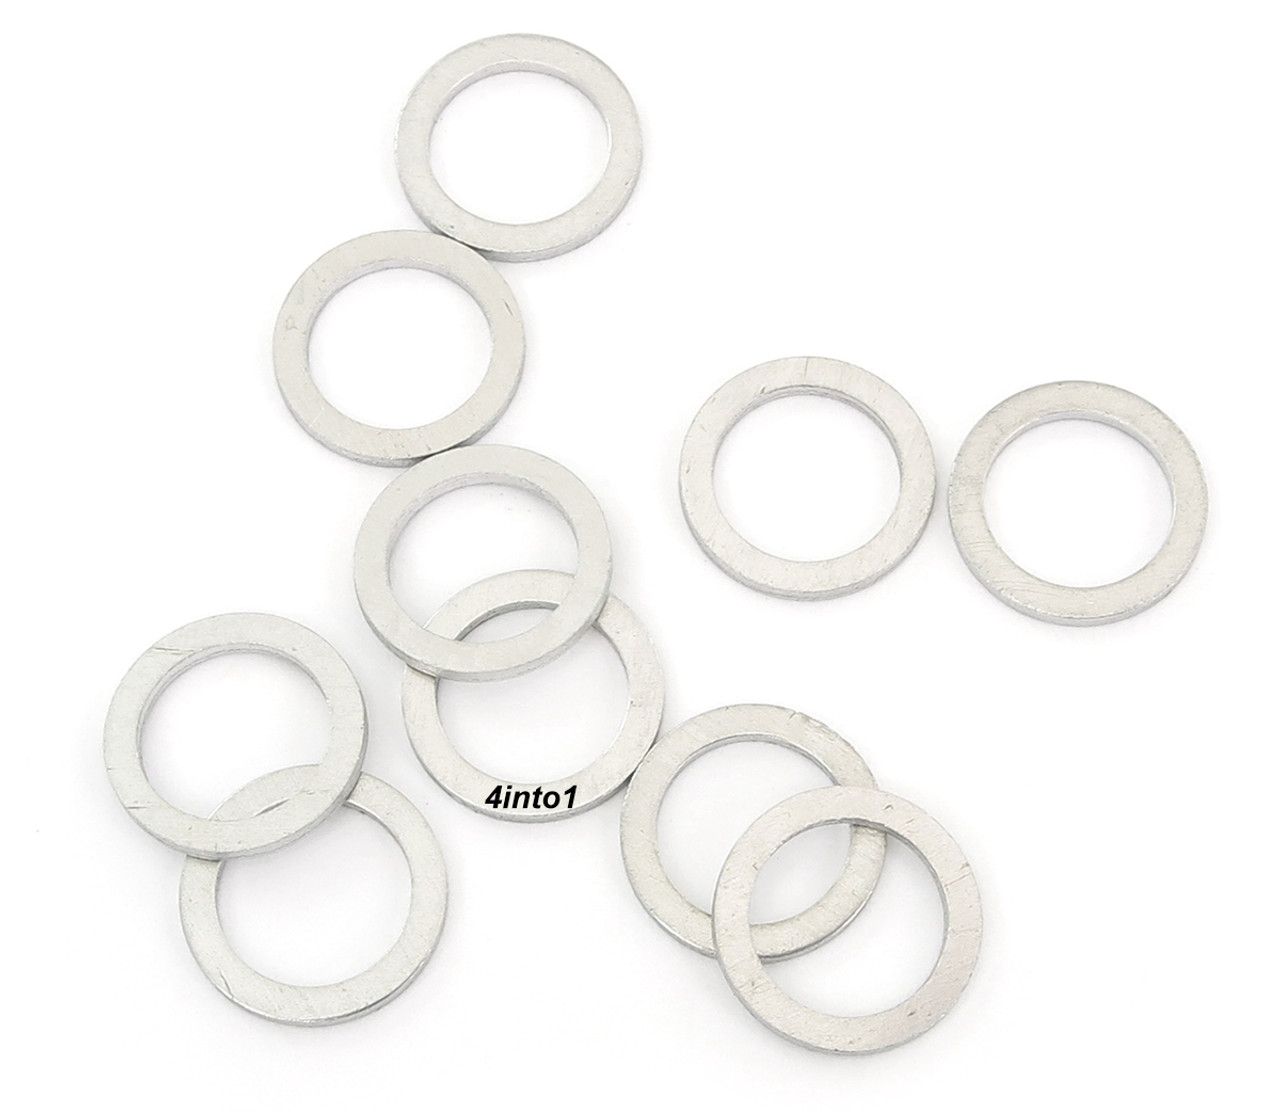 10mm Drag Specialties Crush Washer 10 pack31050